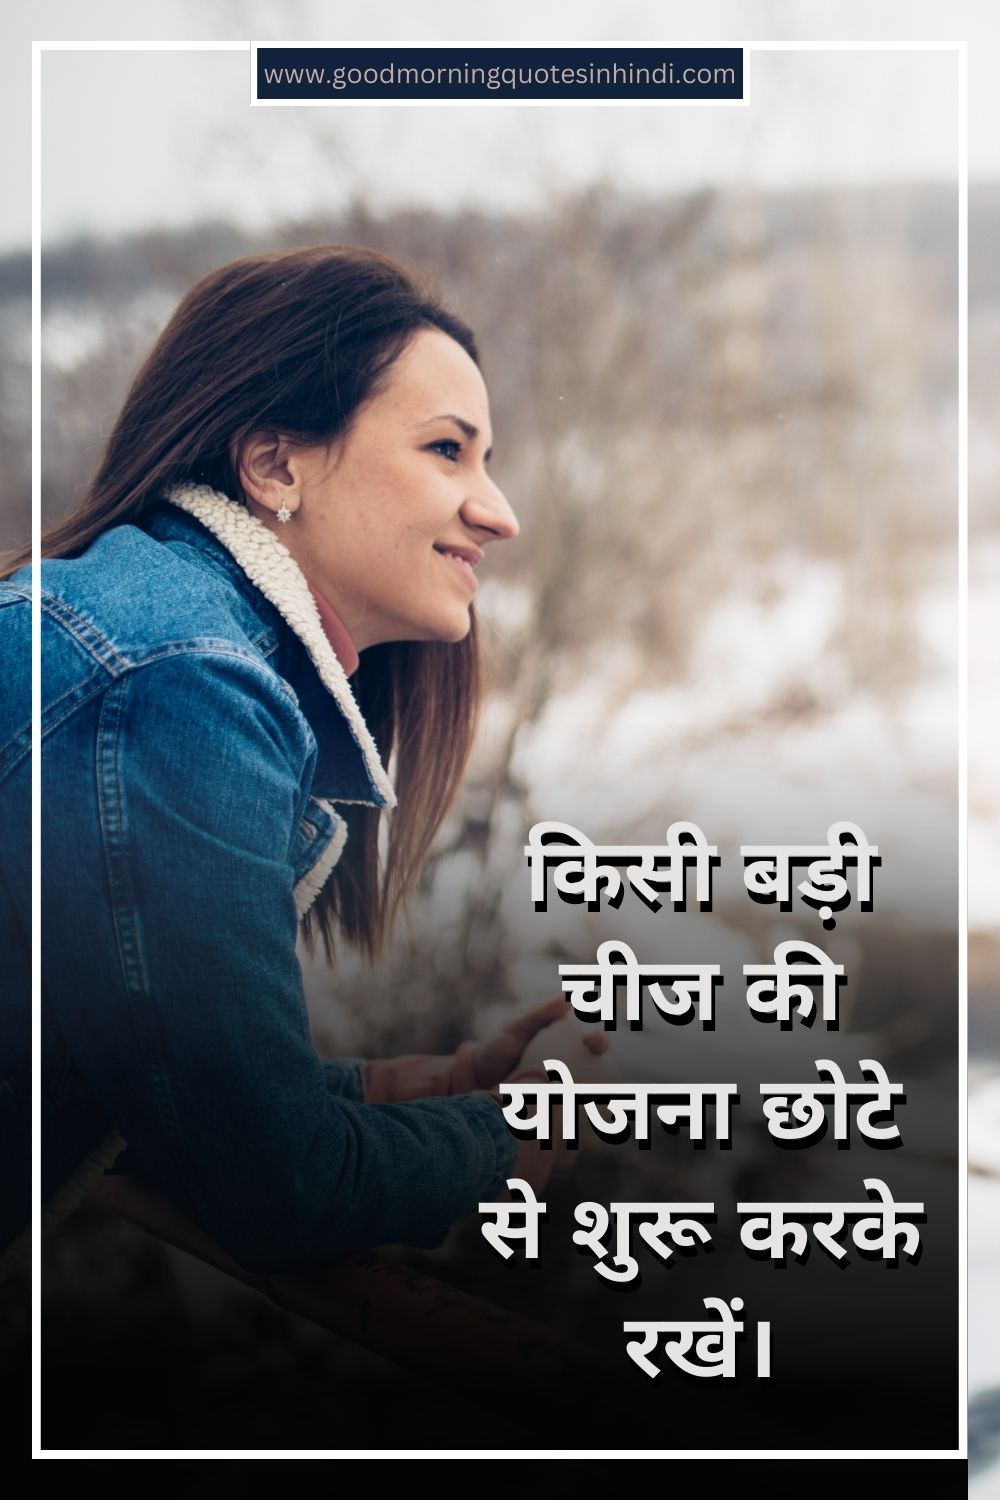 Best Positive Quotes in Hindi